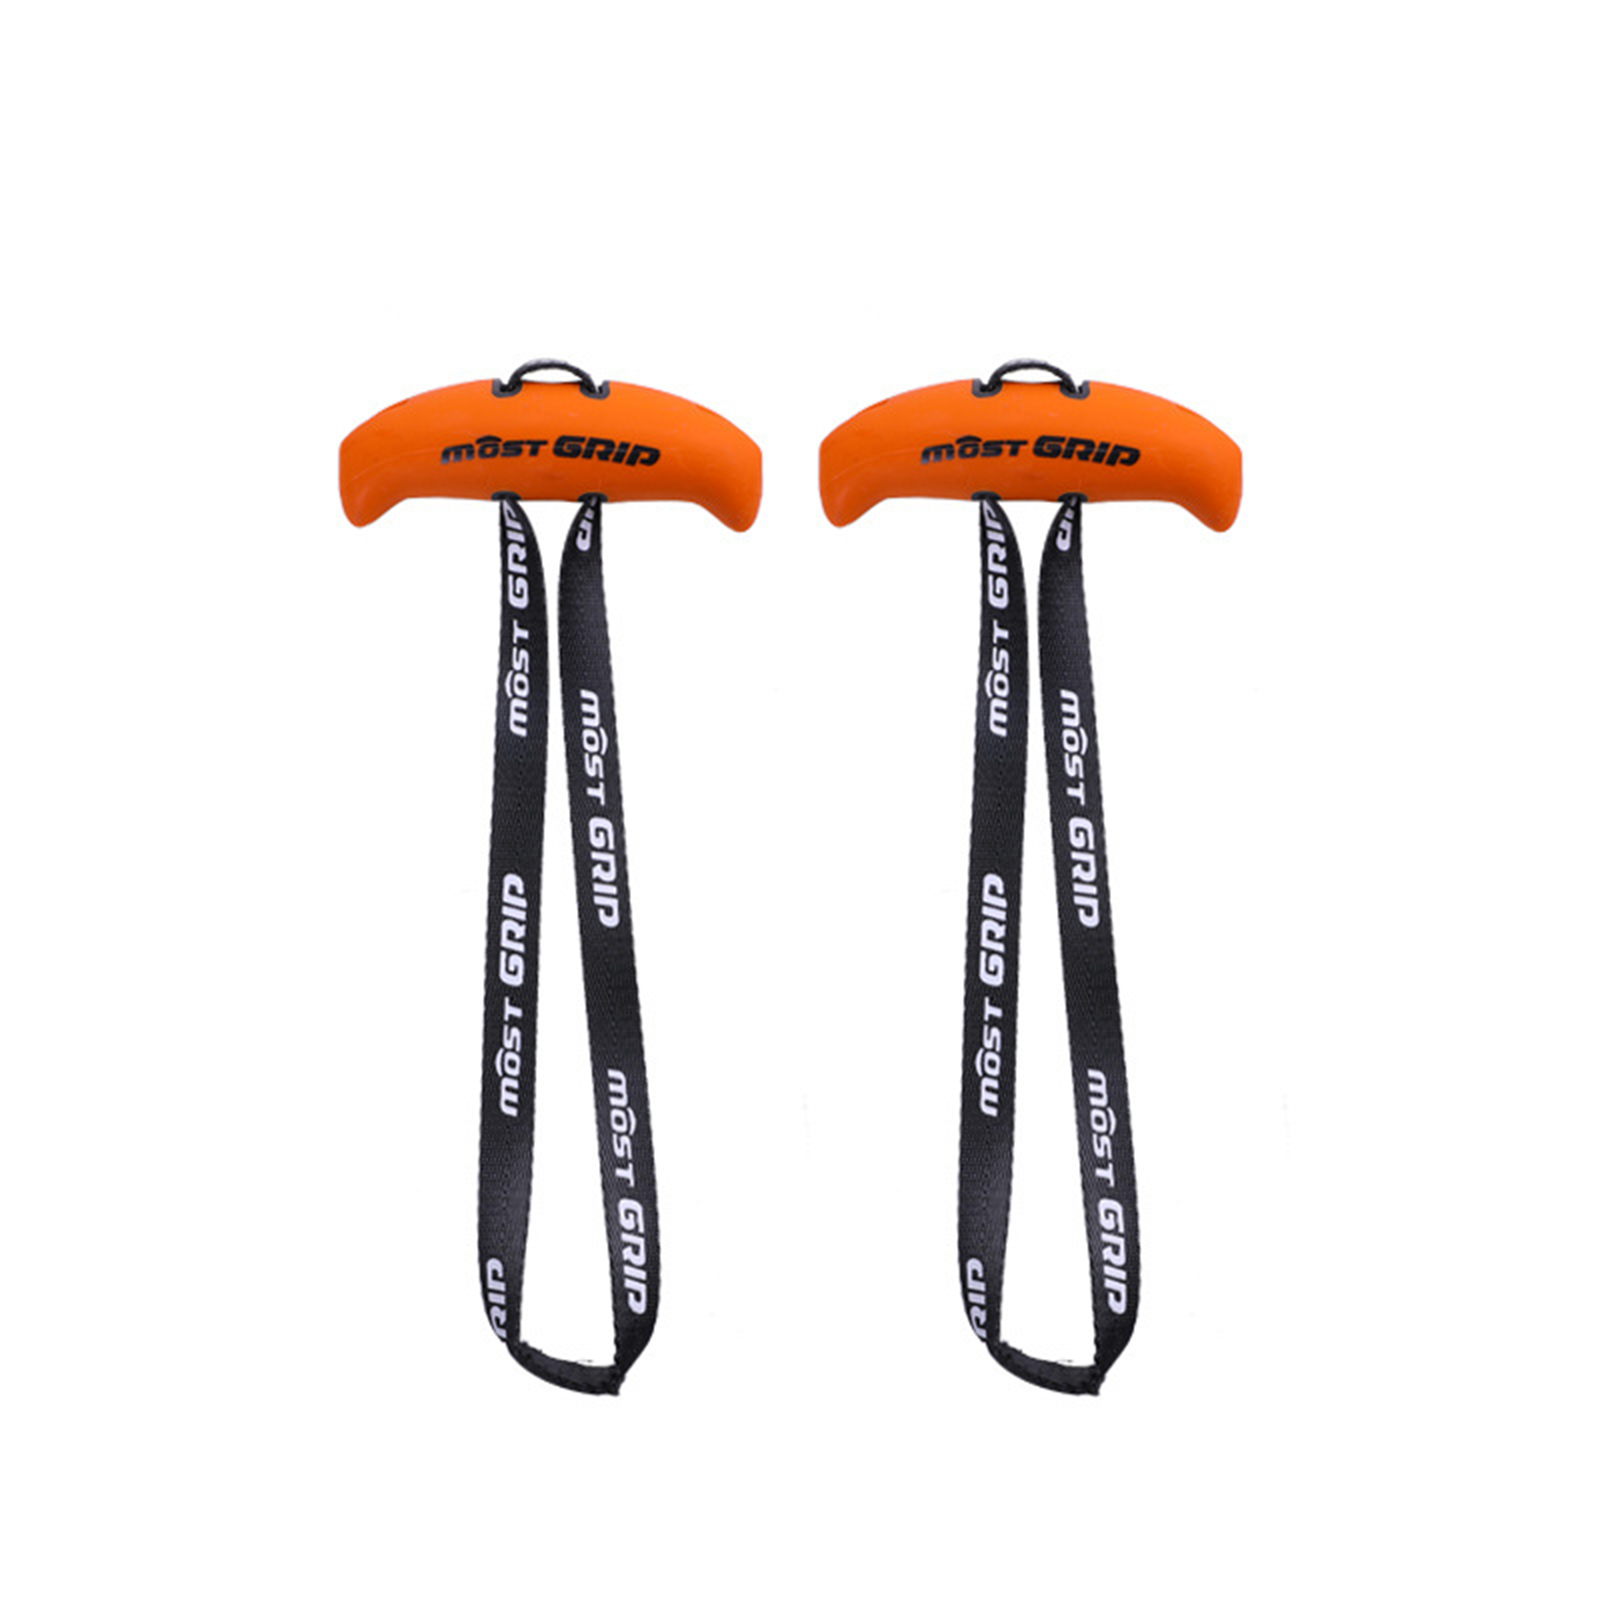 Pull Up Handles Ergonomic Exercise Resistance Band Tranining Grip Handles For Home Gym Pull-up Bars Barbells Orange [horns]